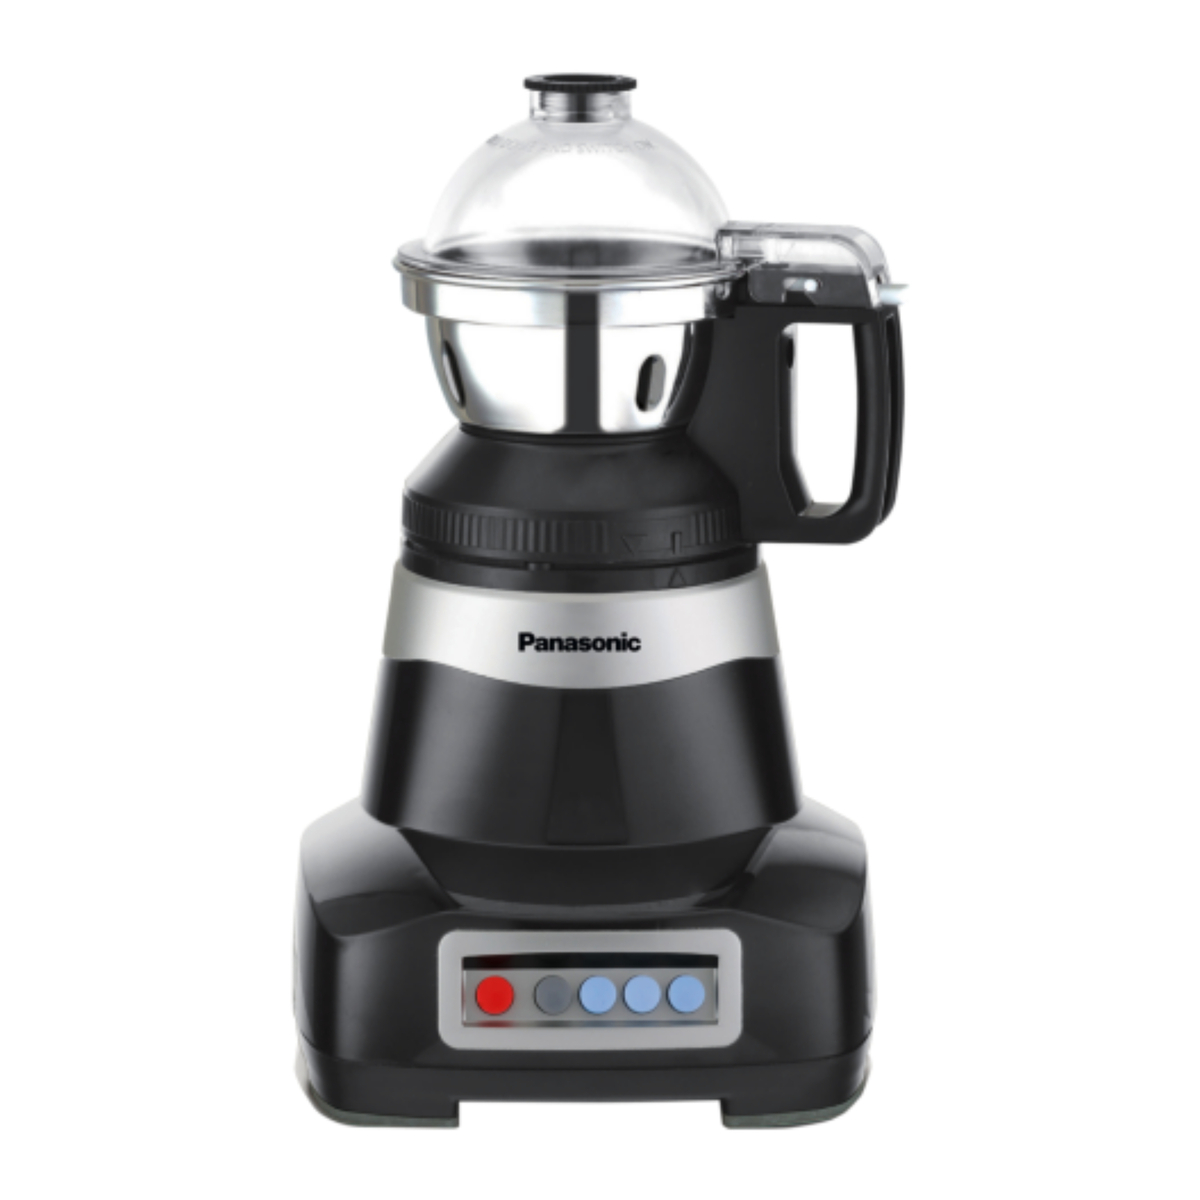 Panasonic Mixed Grinder, 1 L with Flexi Jar and Mill Jar, 2000 W, Stainless Steel, MX-AE365KTZ